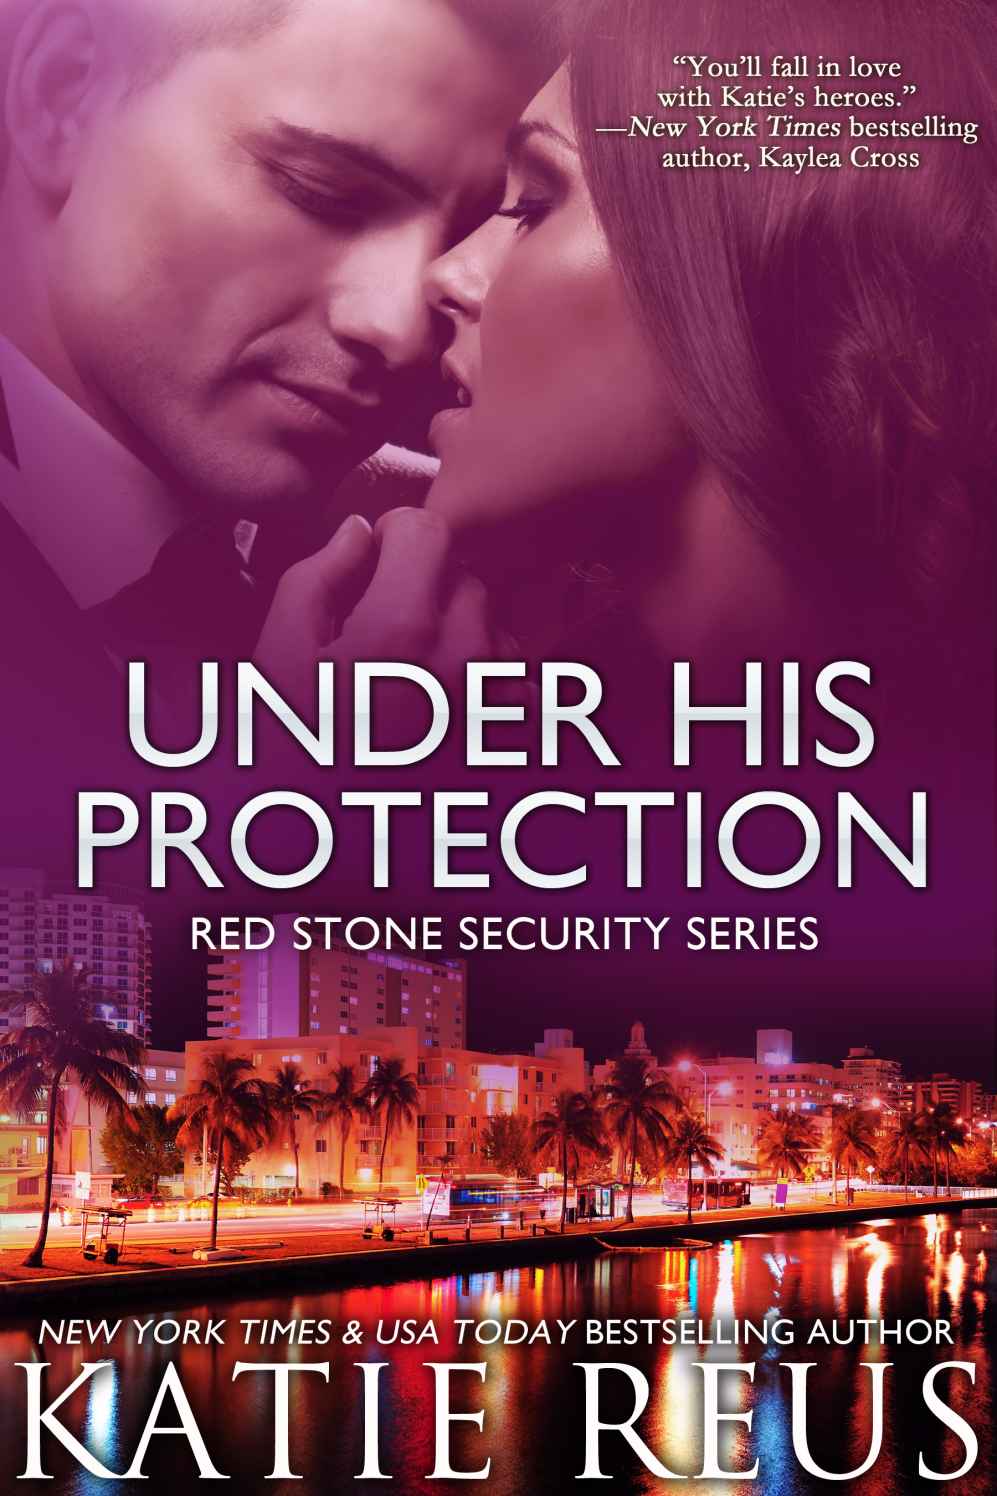 Under His Protection by Katie Reus